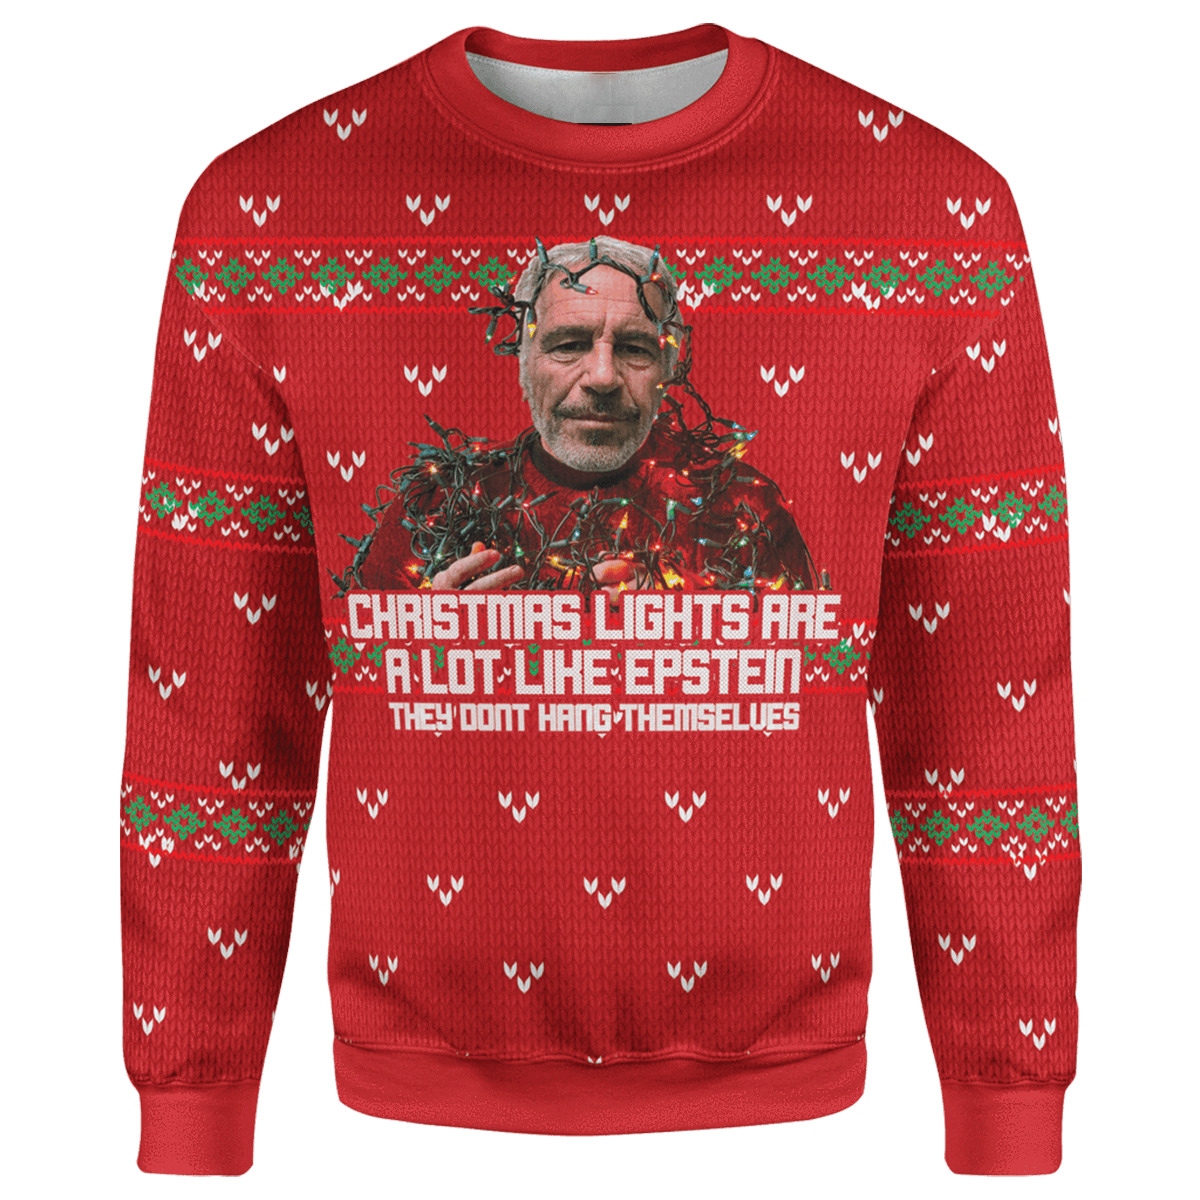 Christmas Lights Are A Lot Like Epstein They Don't Hang Themselves Ugly Christmas Sweater - Saleoffshirt 1811193